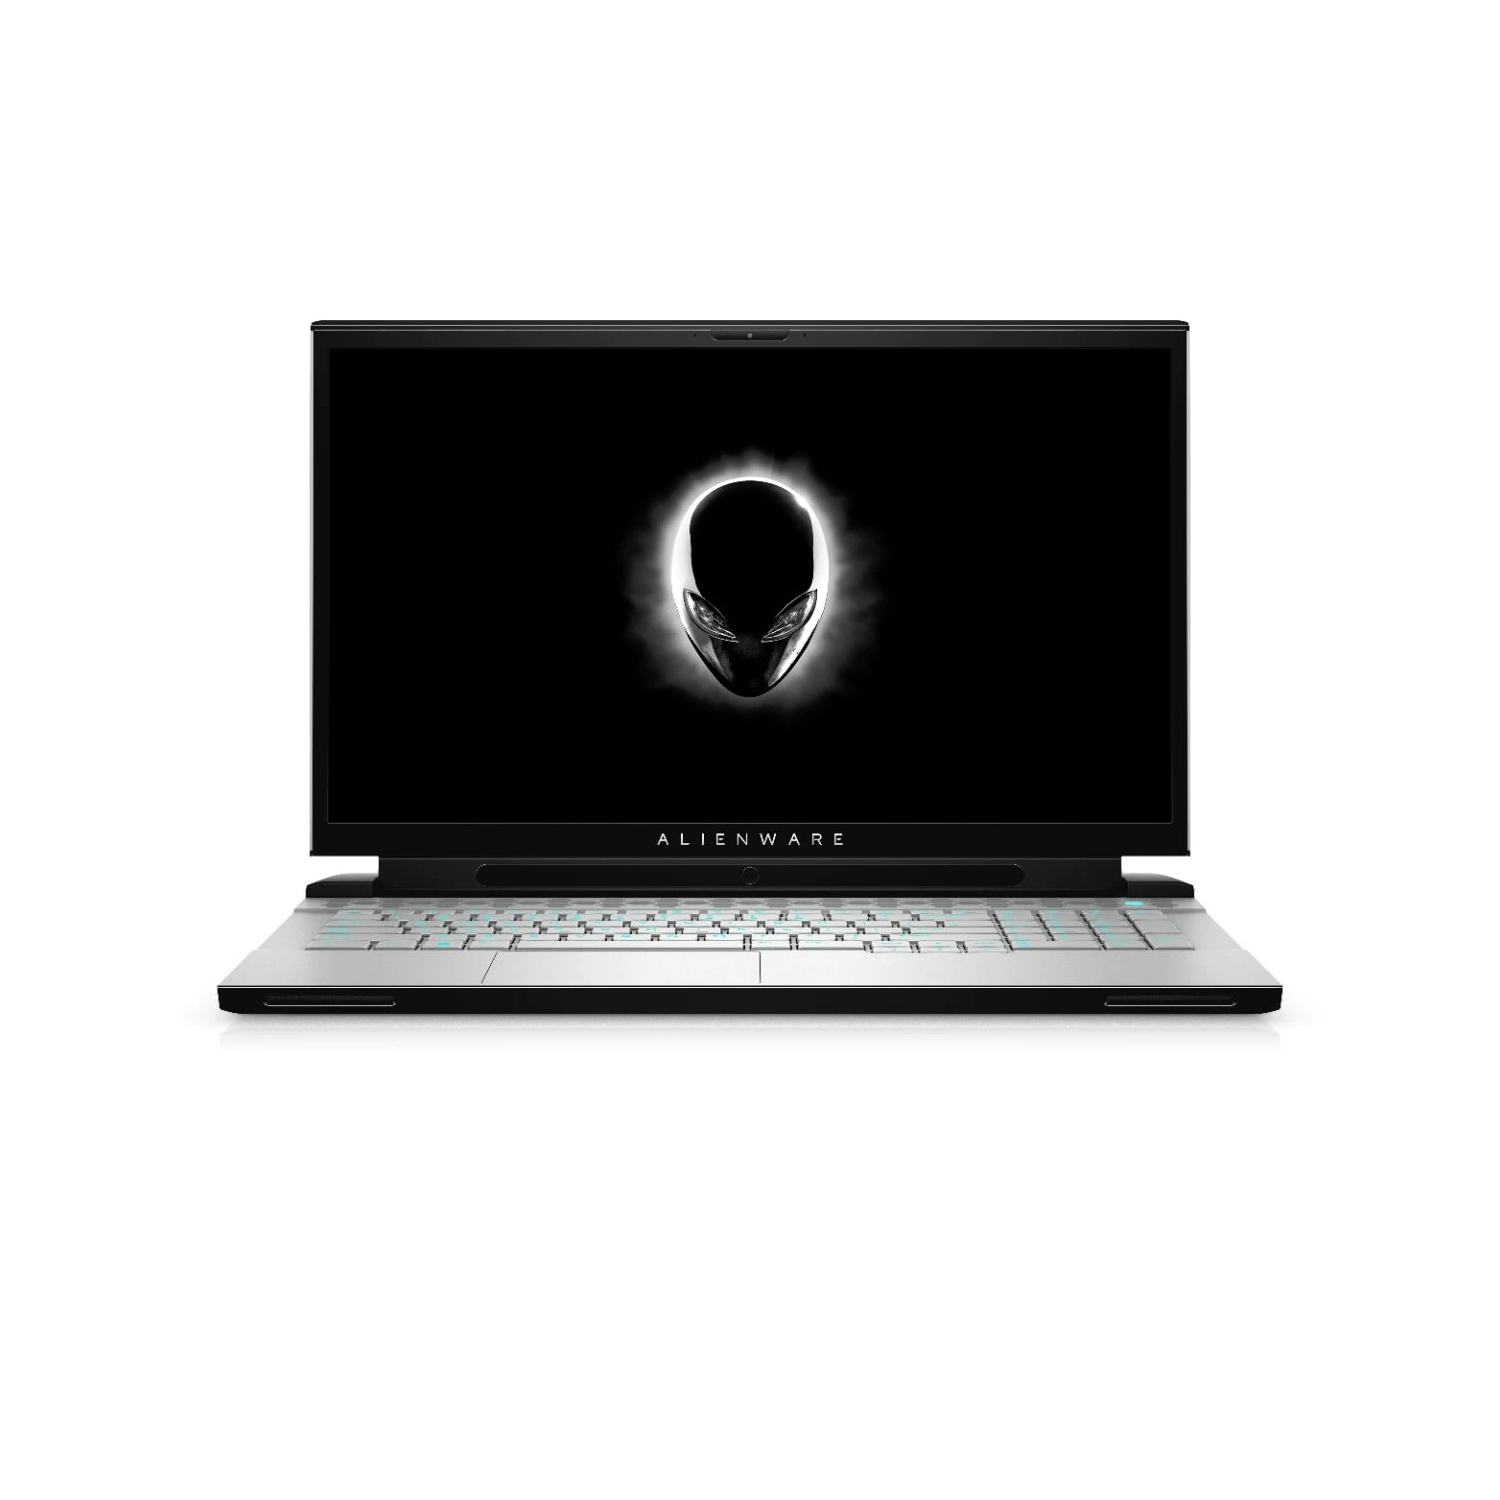 Refurbished (Excellent) - Dell Alienware m17 R2 Gaming Laptop (2019) | 17.3" FHD | Core i7 - 512GB SSD - 16GB RAM - RTX 2060 | 6 Cores @ 4.5 GHz Certified Refurbished